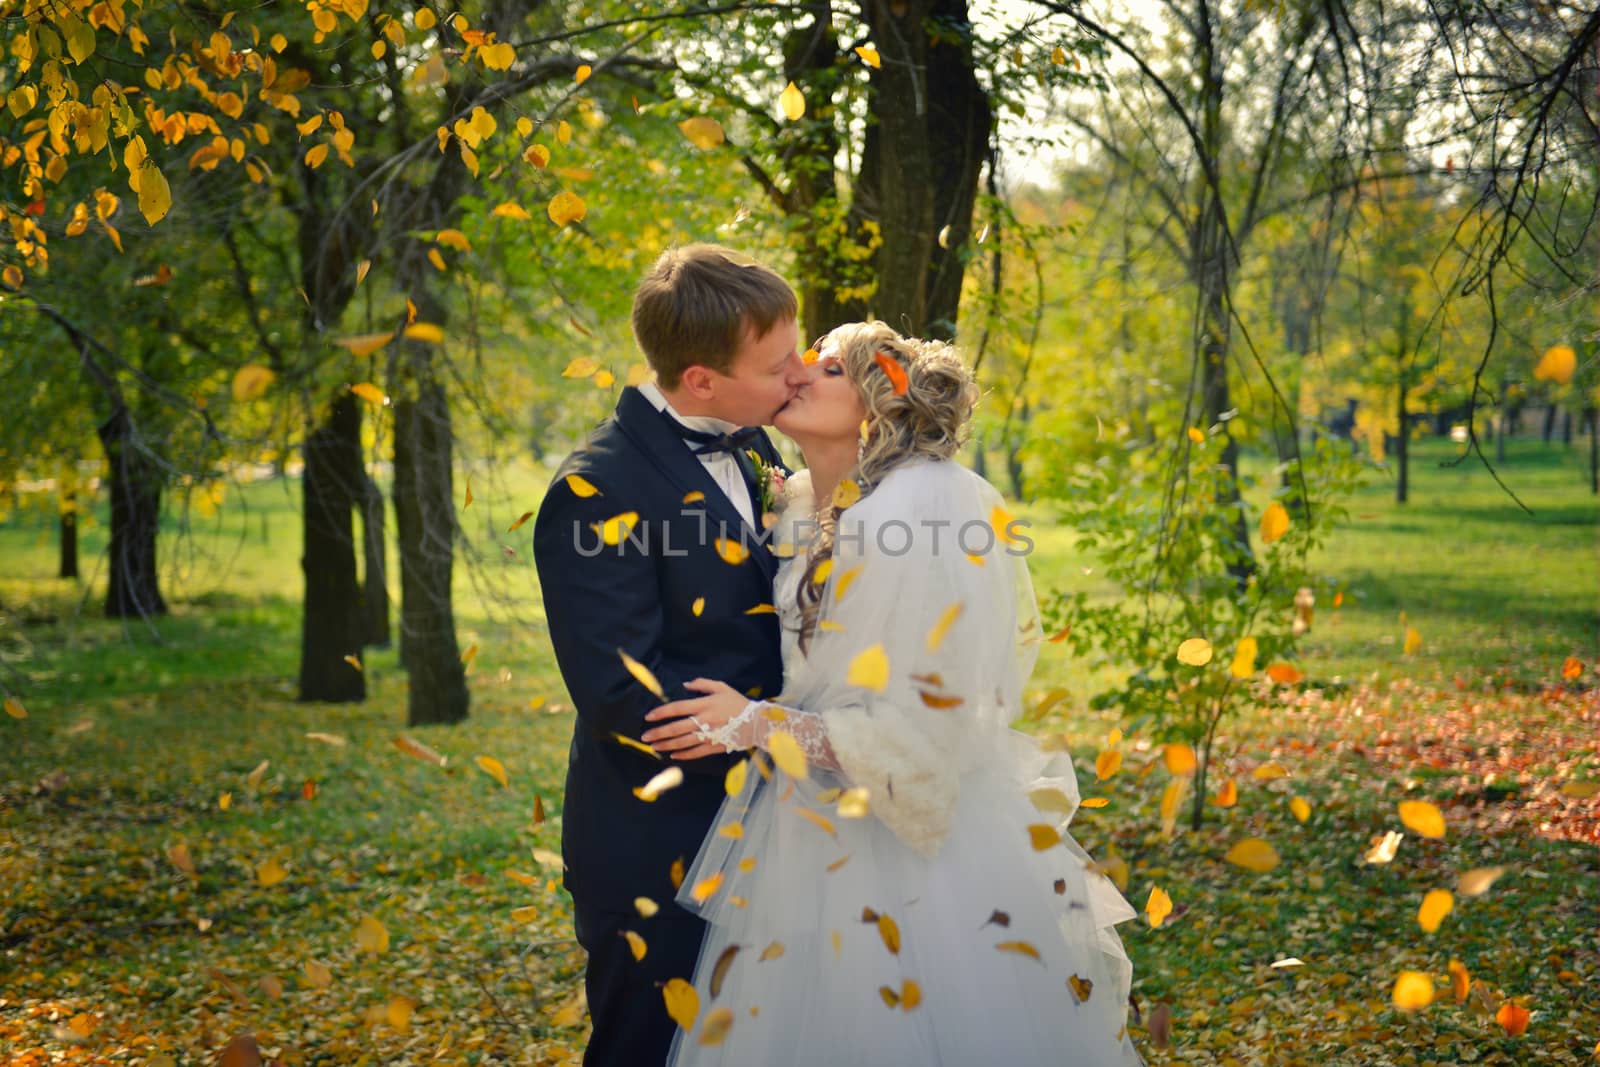 a kiss of a newly-married couple in an autumn park by marynkin